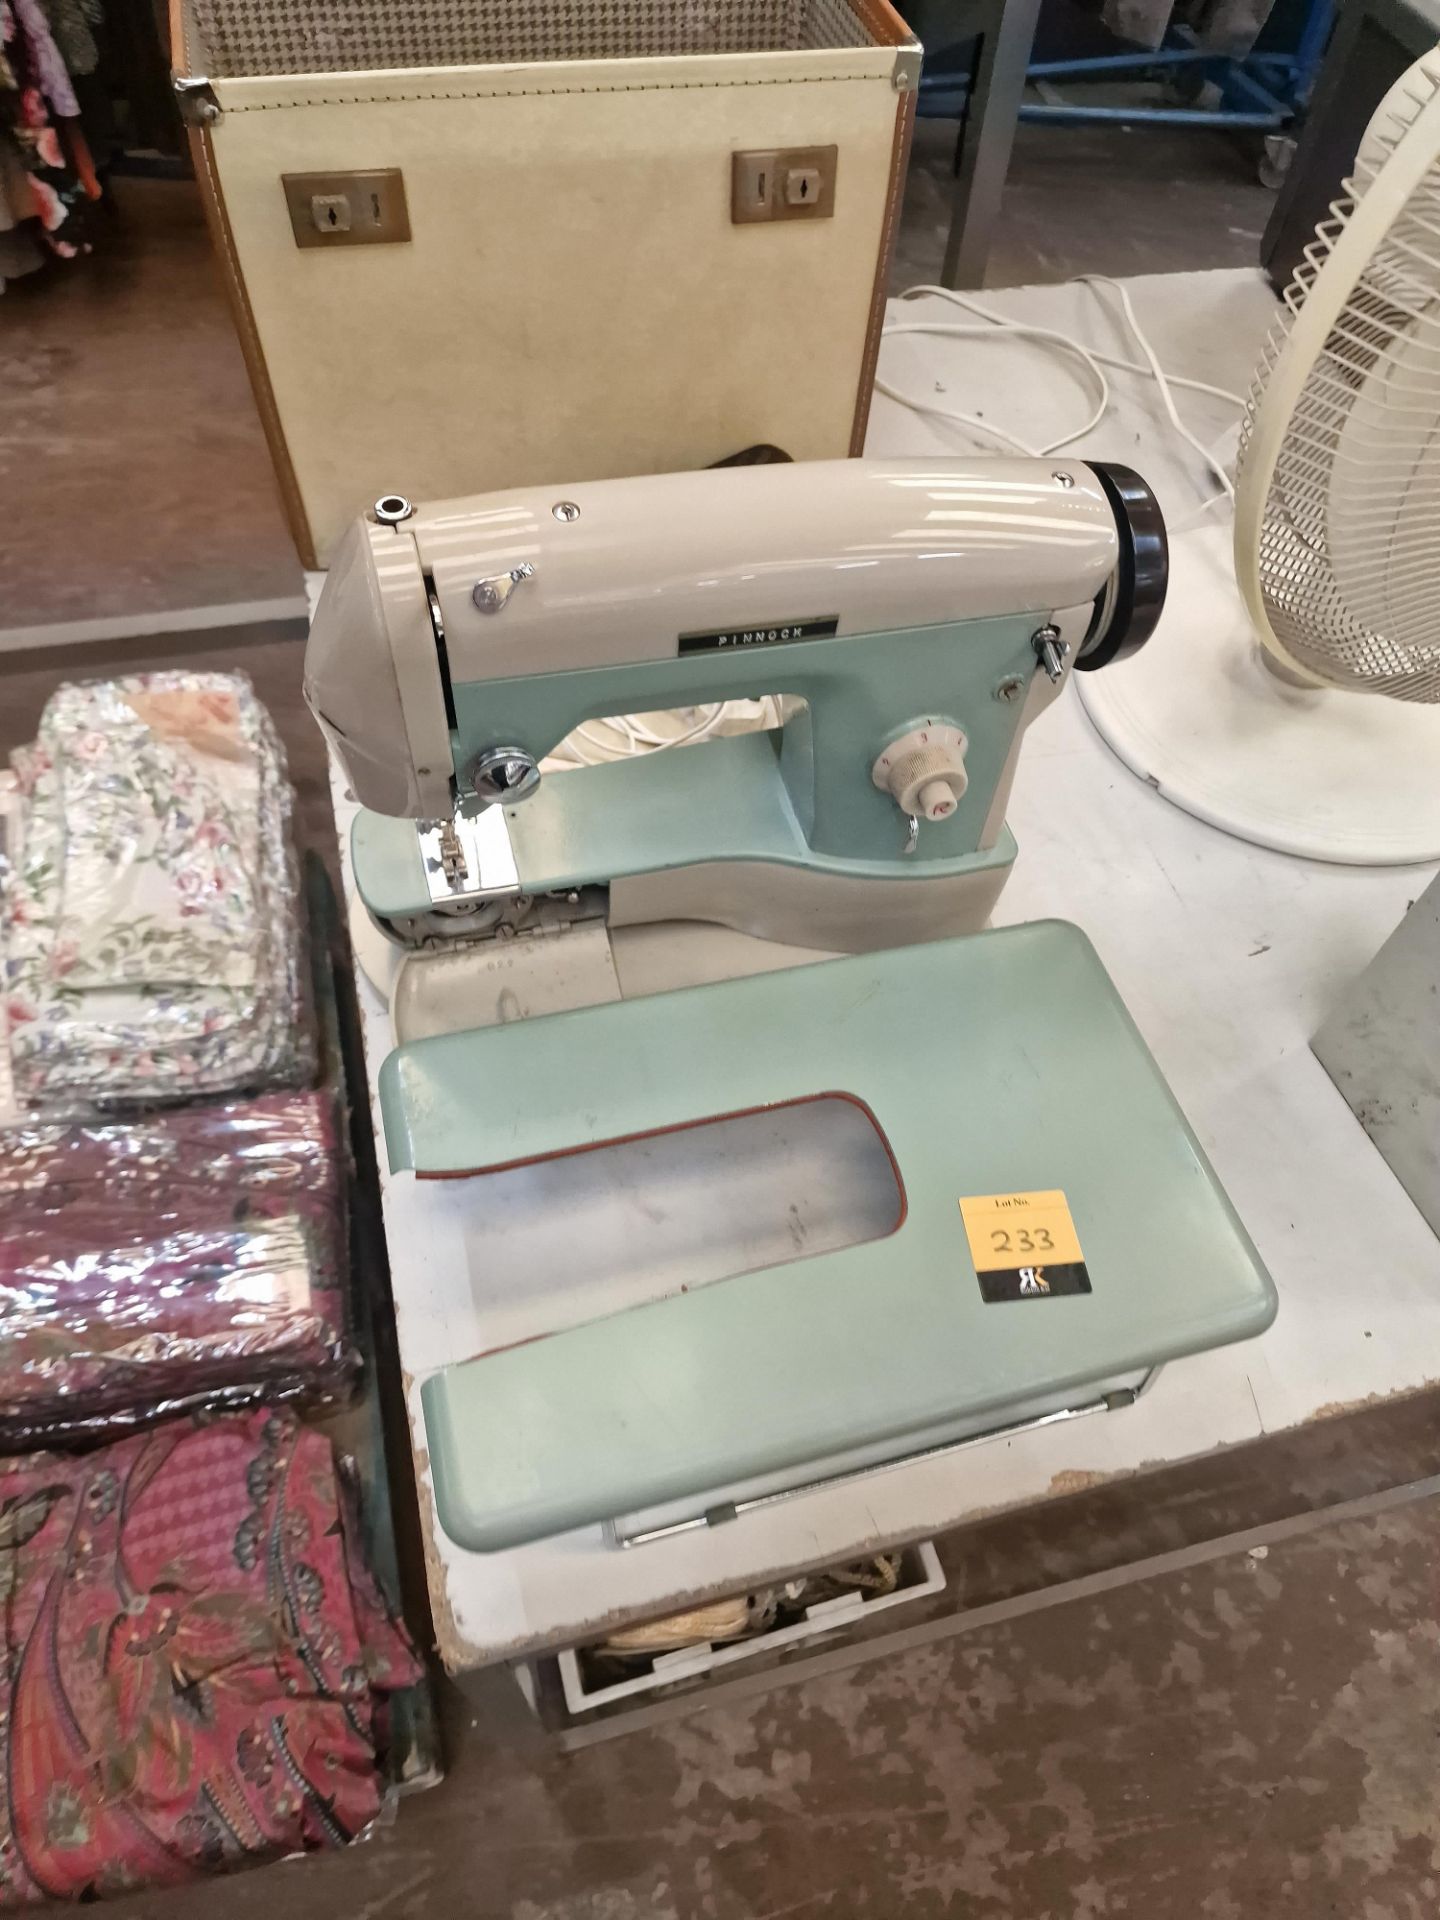 Pinnock sewing machine including foot pedal and carry case - Image 2 of 6